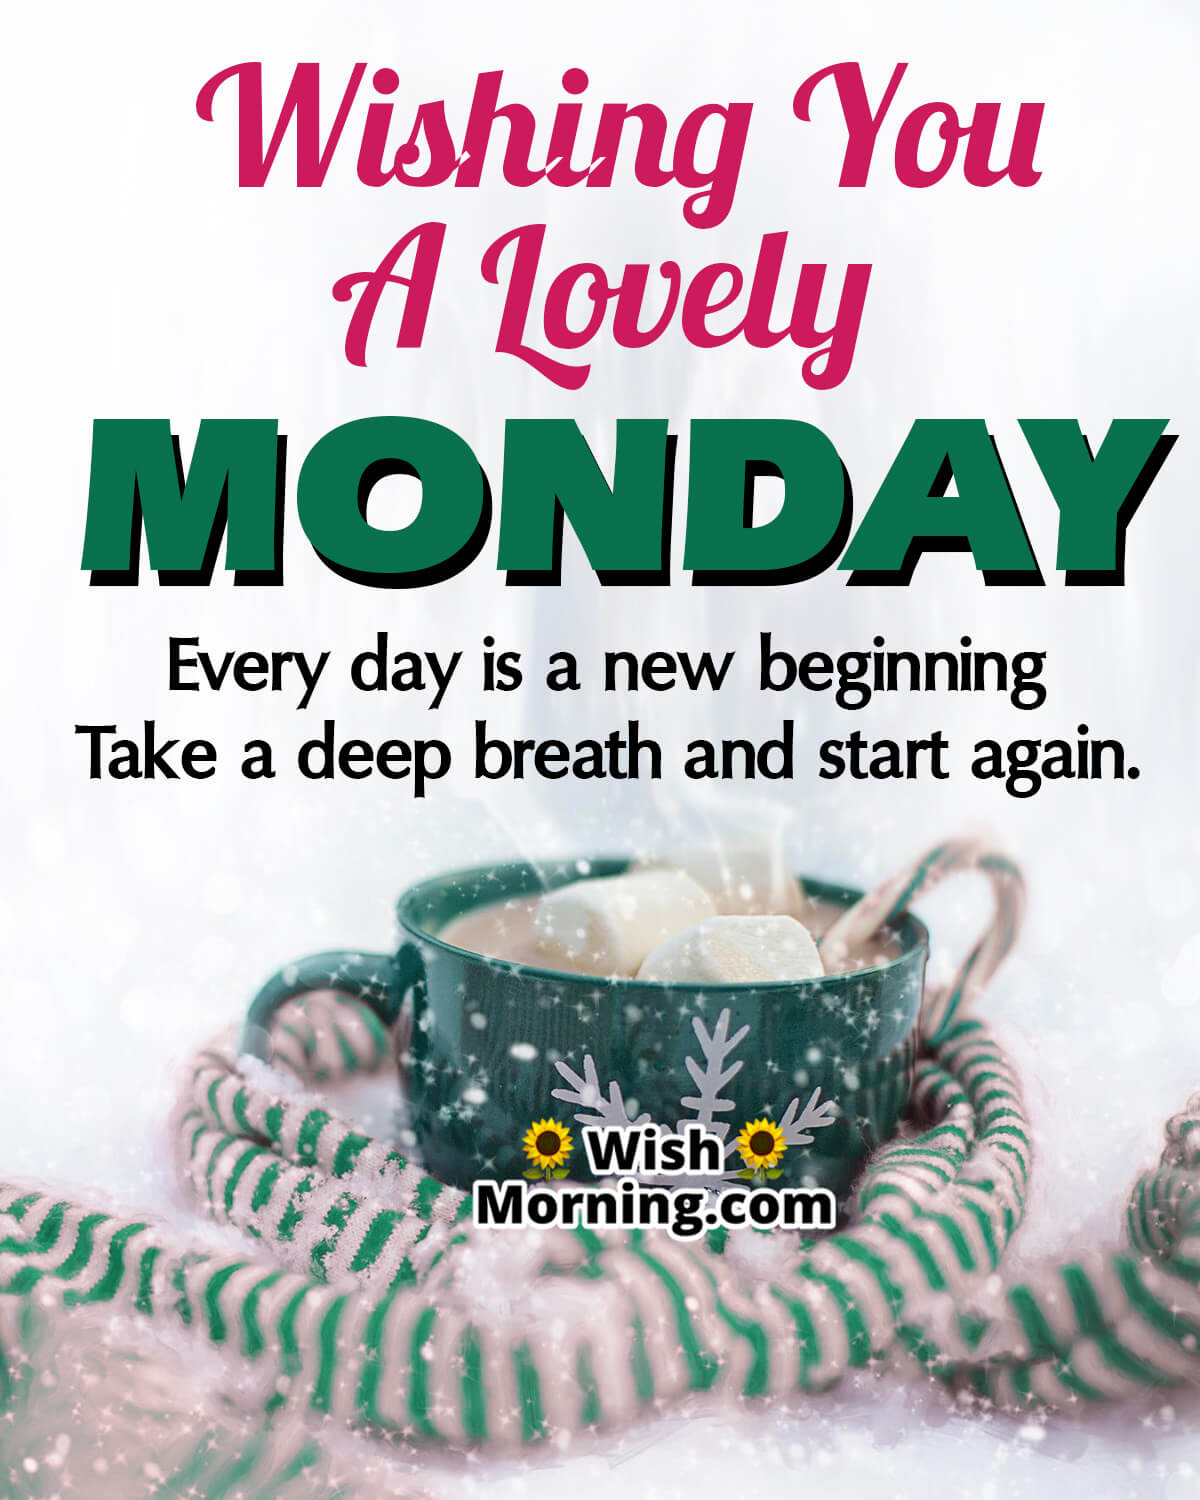 Wishing You A Lovely Monday